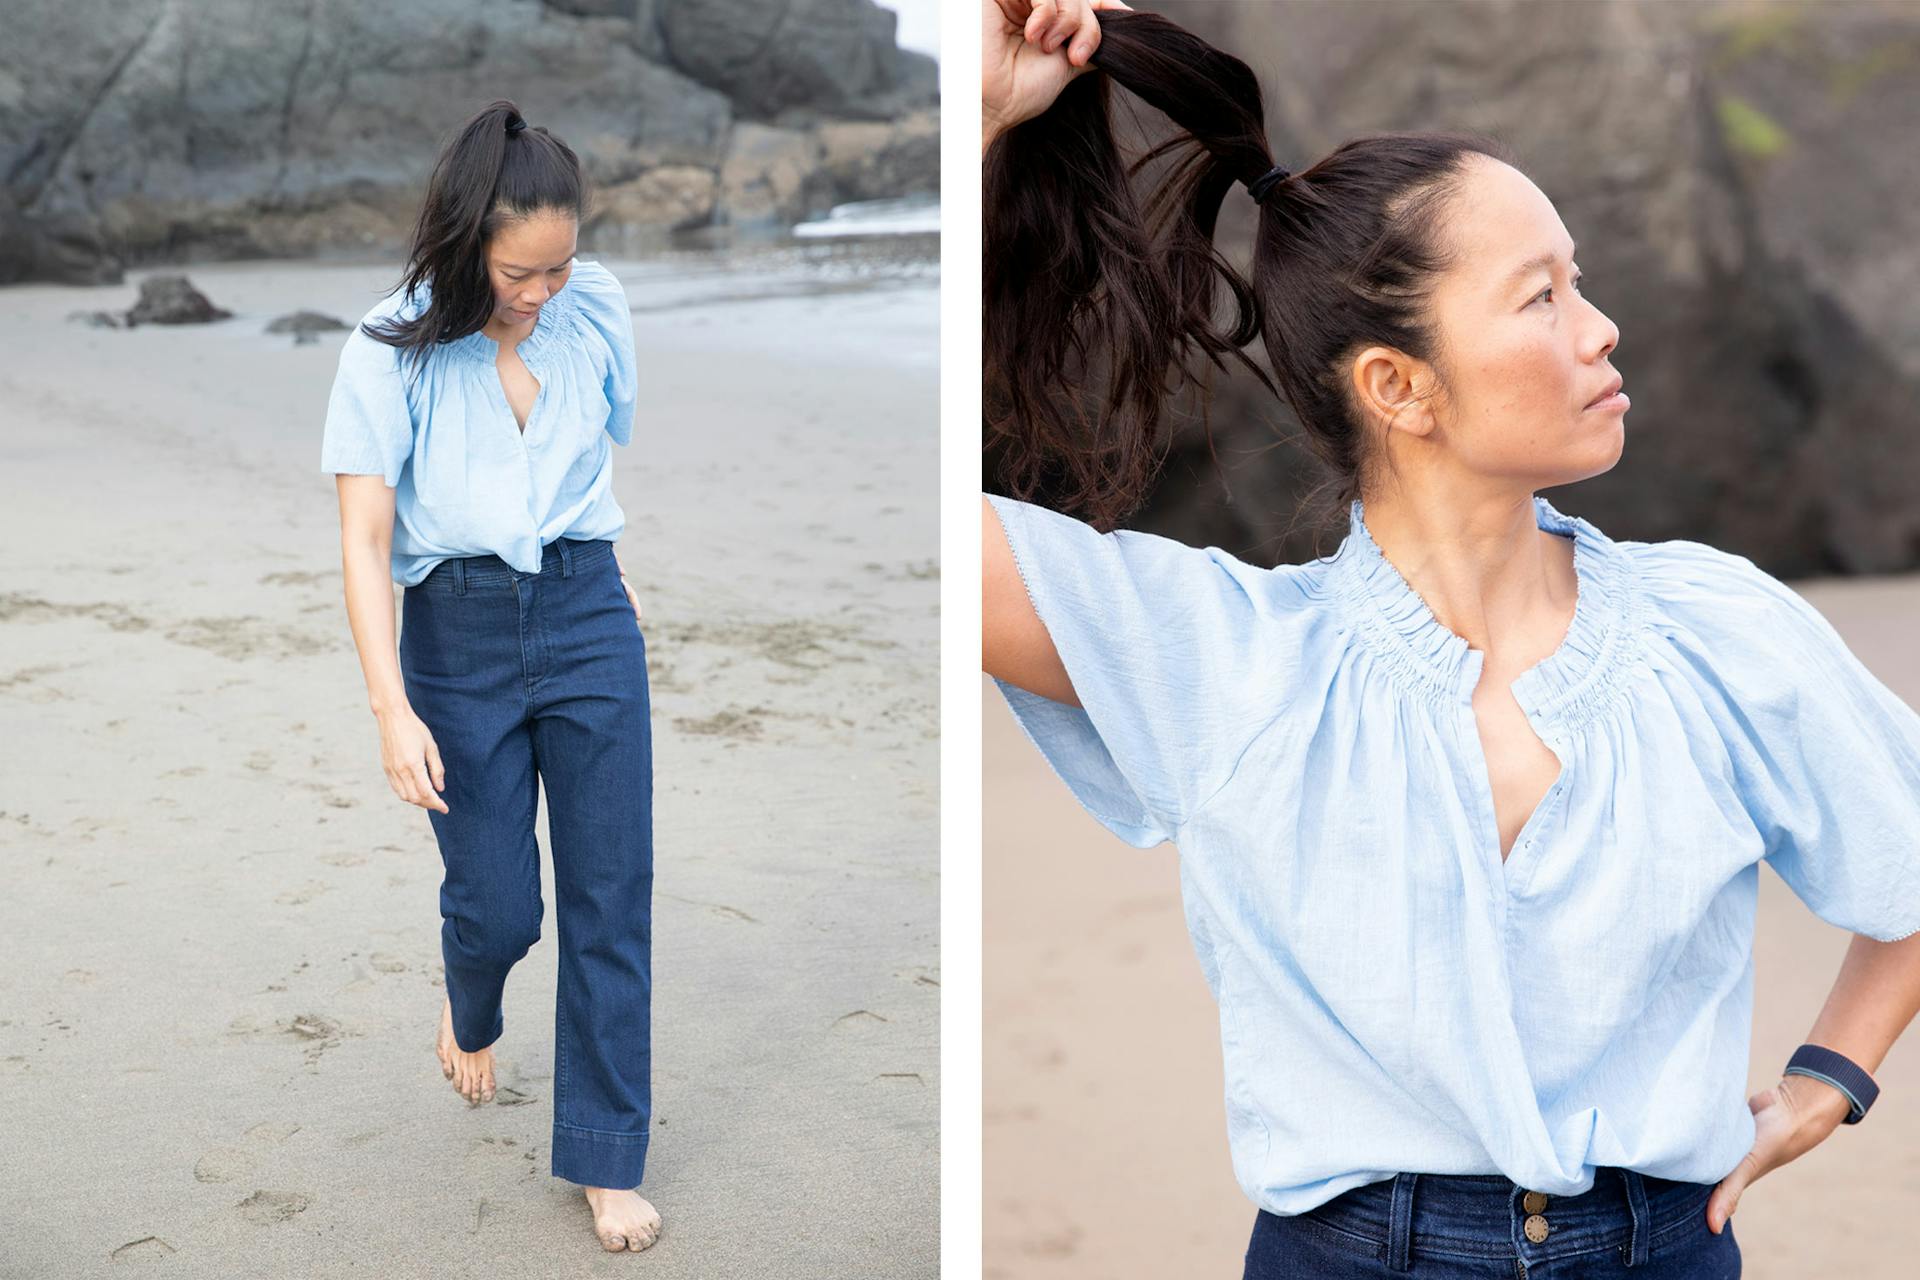 Two images. In the first Bonnie Tsui wears a light blue top and blue pants and walks on the beach. In the second, Bonnie Tsui wears a light top and is facing away from the camera.